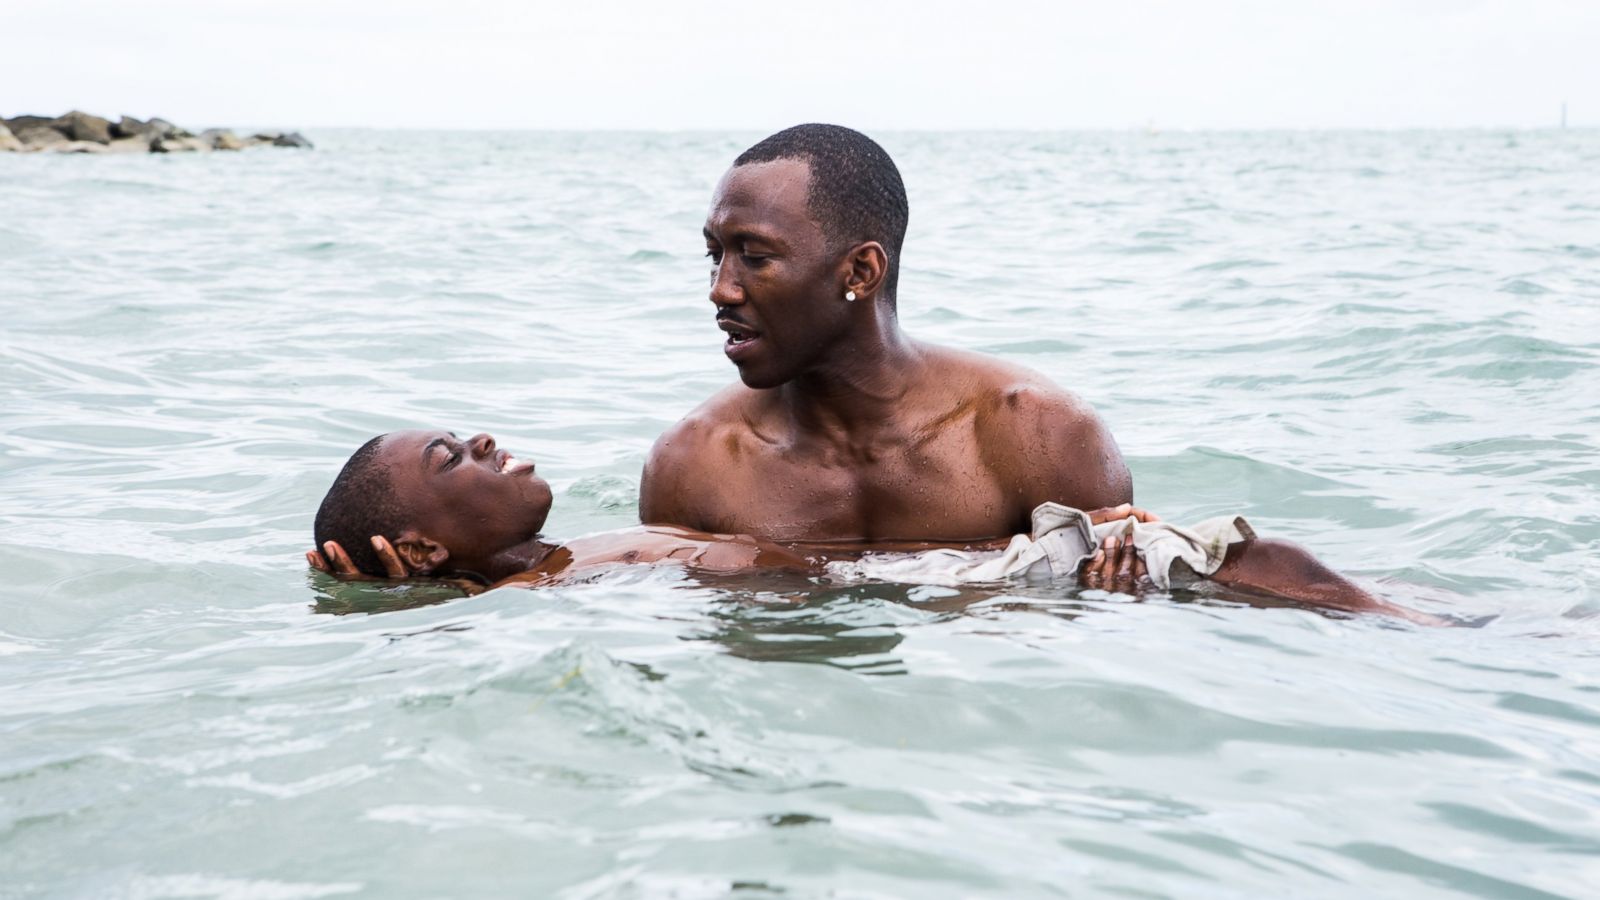 'Moonlight' Director Barry Jenkins Says He Can't Watch His Film With an Audience